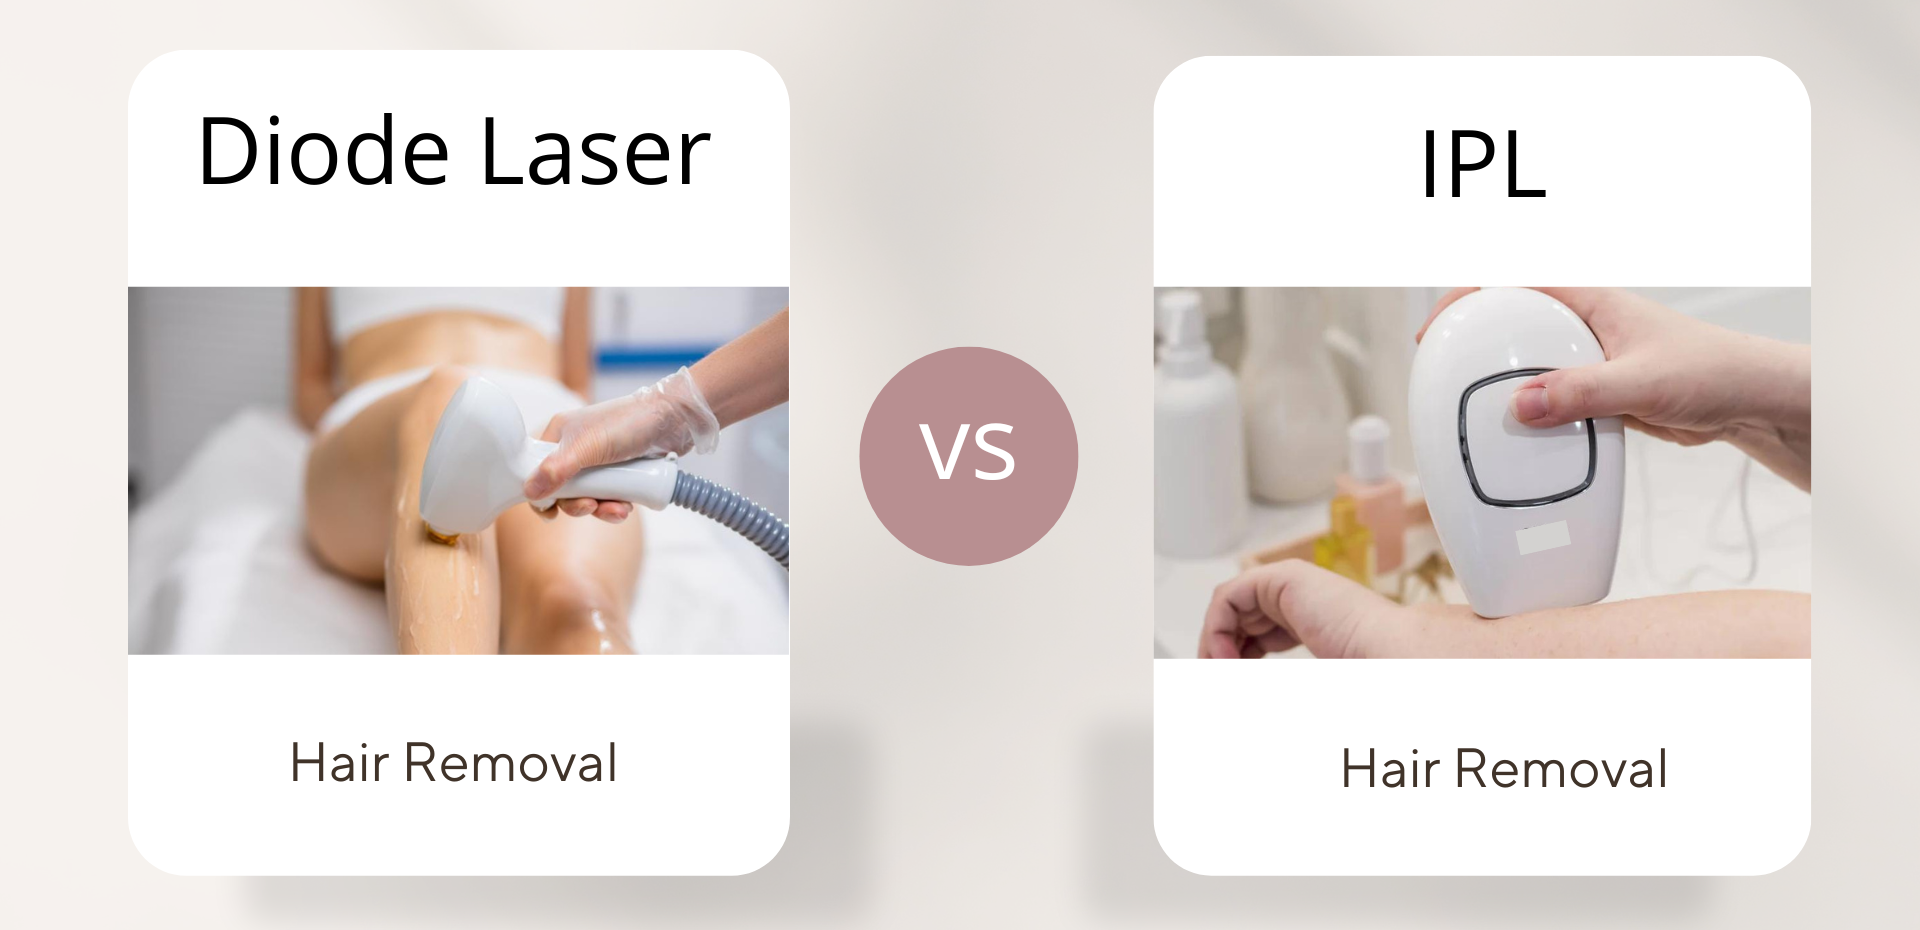 Diode Laser VS IPL Hair Removal Technology: Which One Is Right For You?